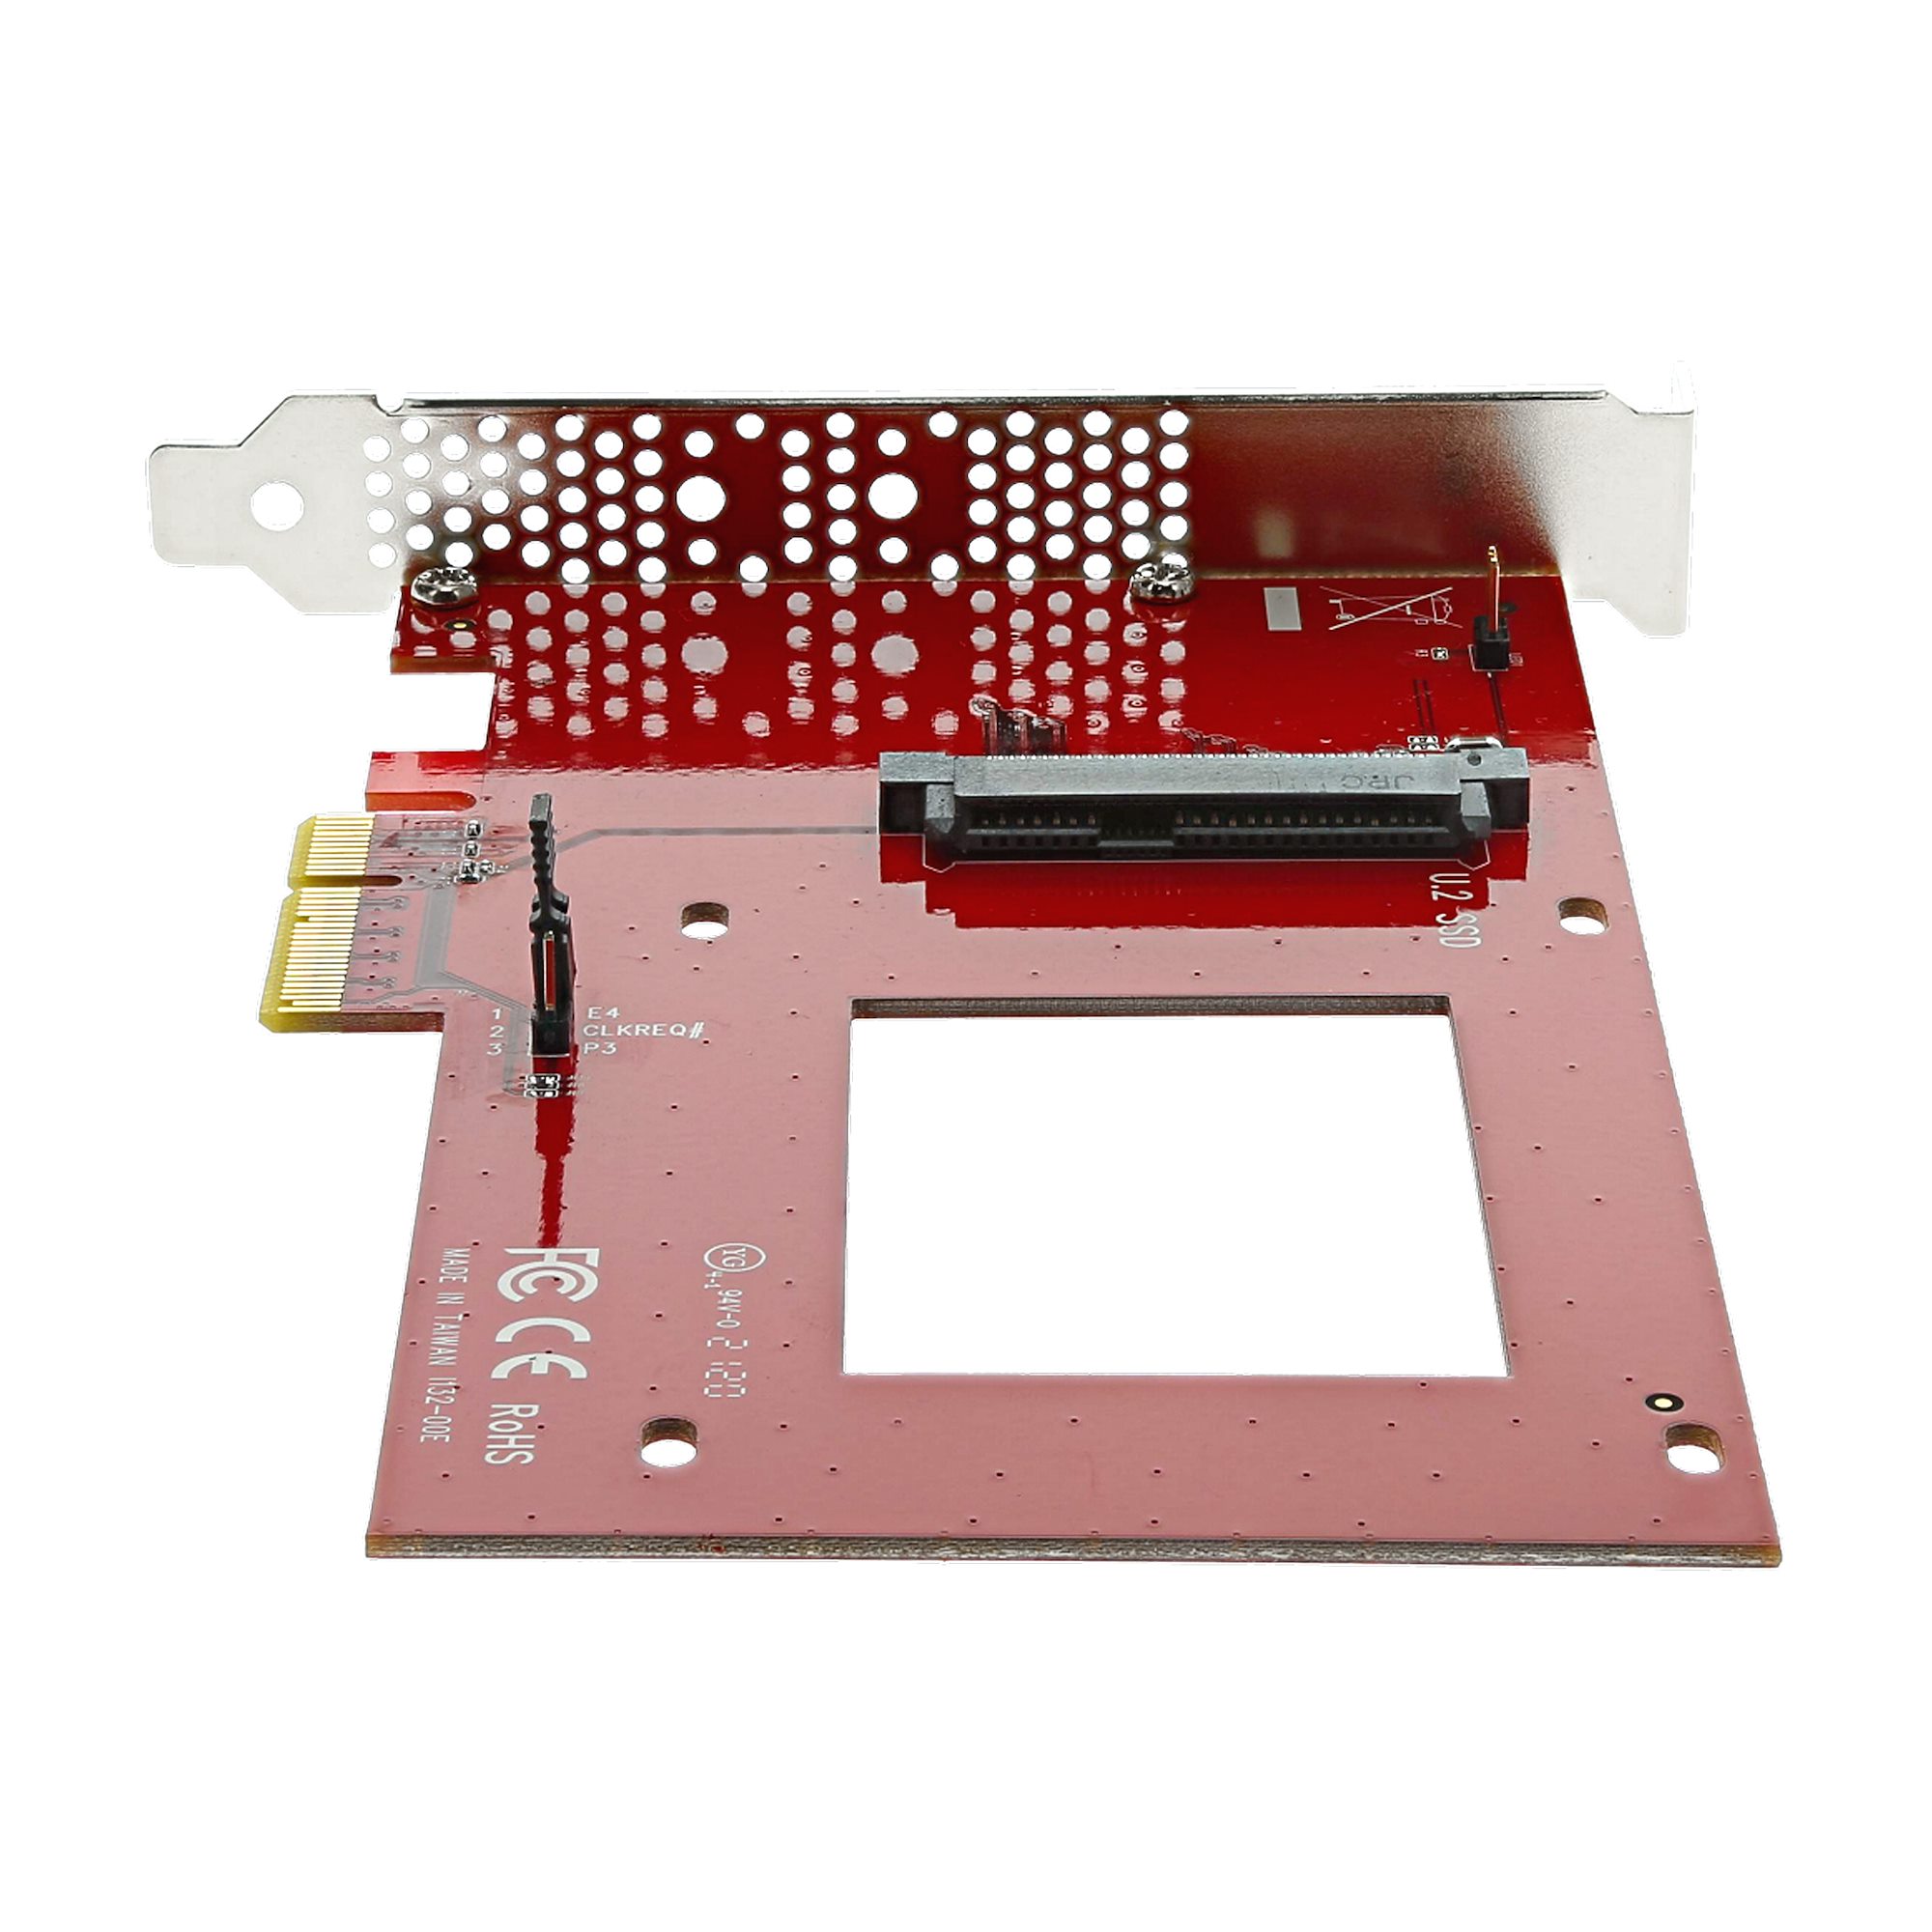 Adapter, U.2 to PCIe - 2.5' U.2 NVMe SSD - Drive Adapters and